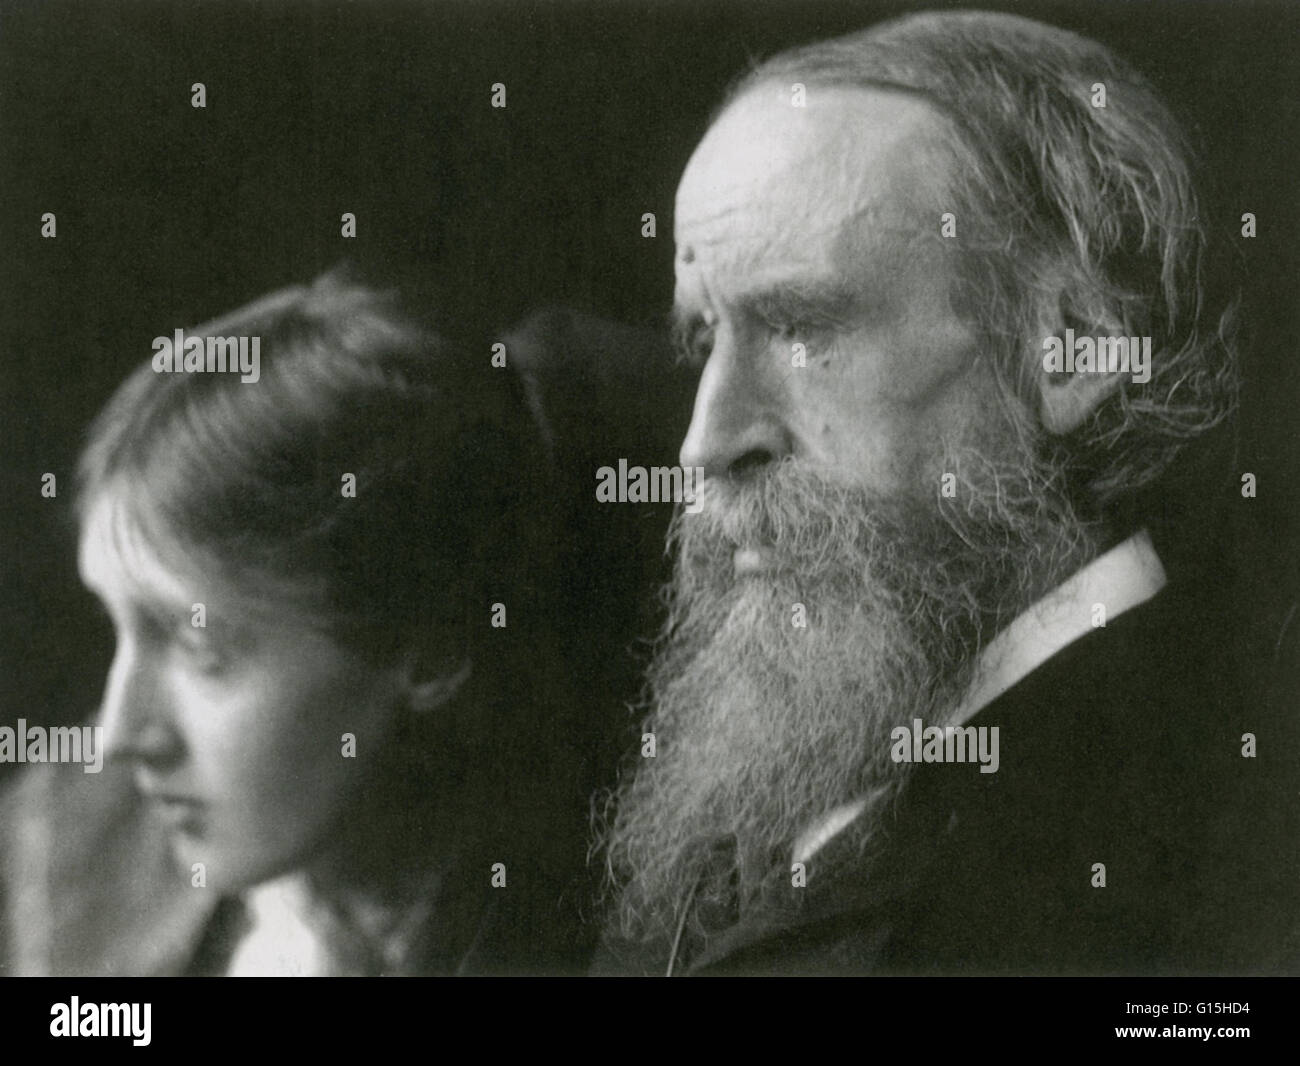 Undated photograph of Woolf with her father Sir Leslie Stephen. Adeline Virginia Woolf (January 25, 1882 - March 28, 1941) was an English writer, and one of the foremost modernists of the twentieth century. She was a significant figure in London literary Stock Photo